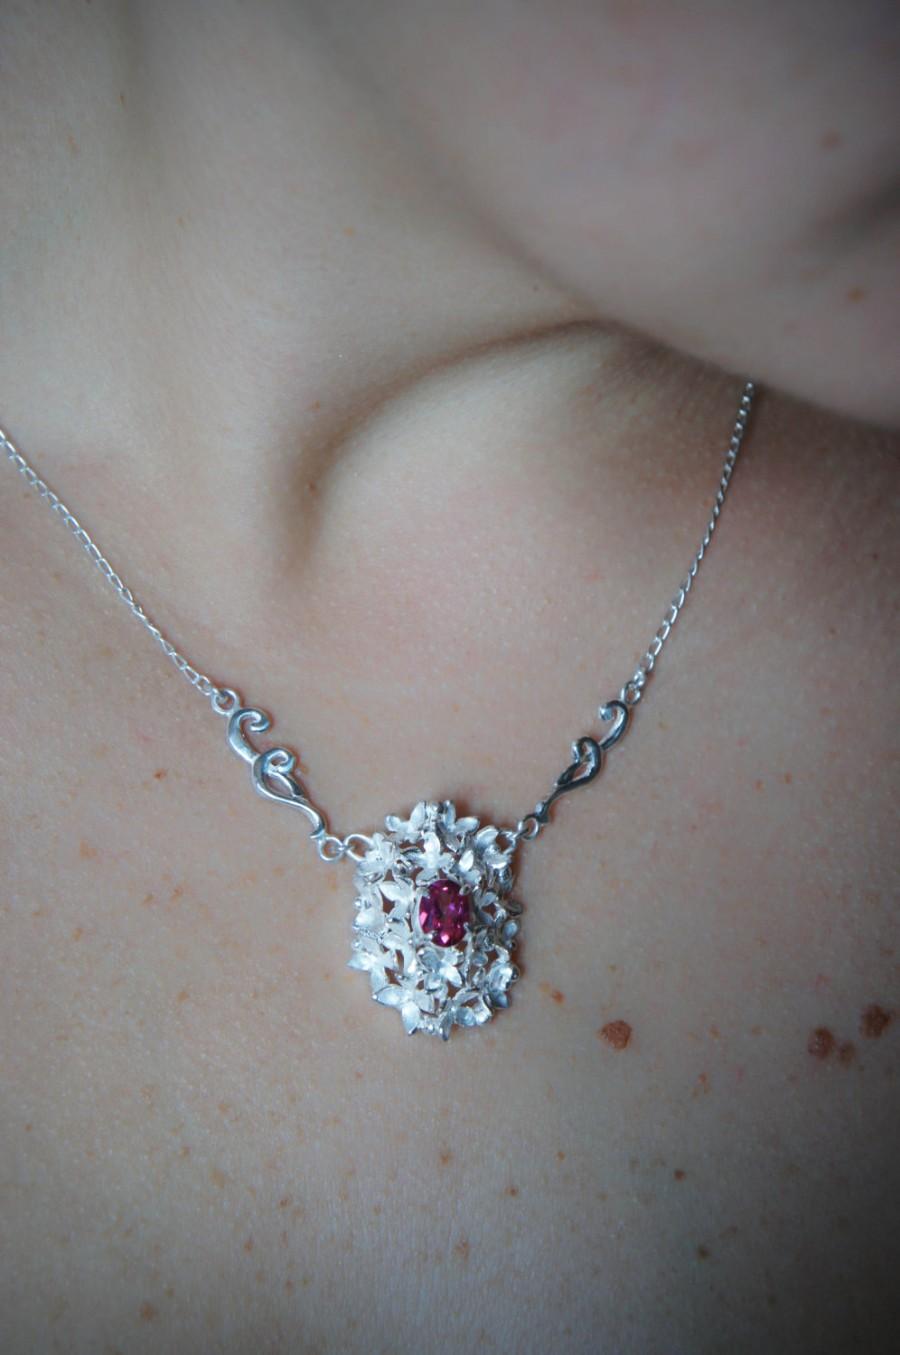 Mariage - Bridal necklace, flower necklace, sterling silver, pink topaz pendant, wedding necklace, bridal jewelry, floral jewelry, heirloom, romantic